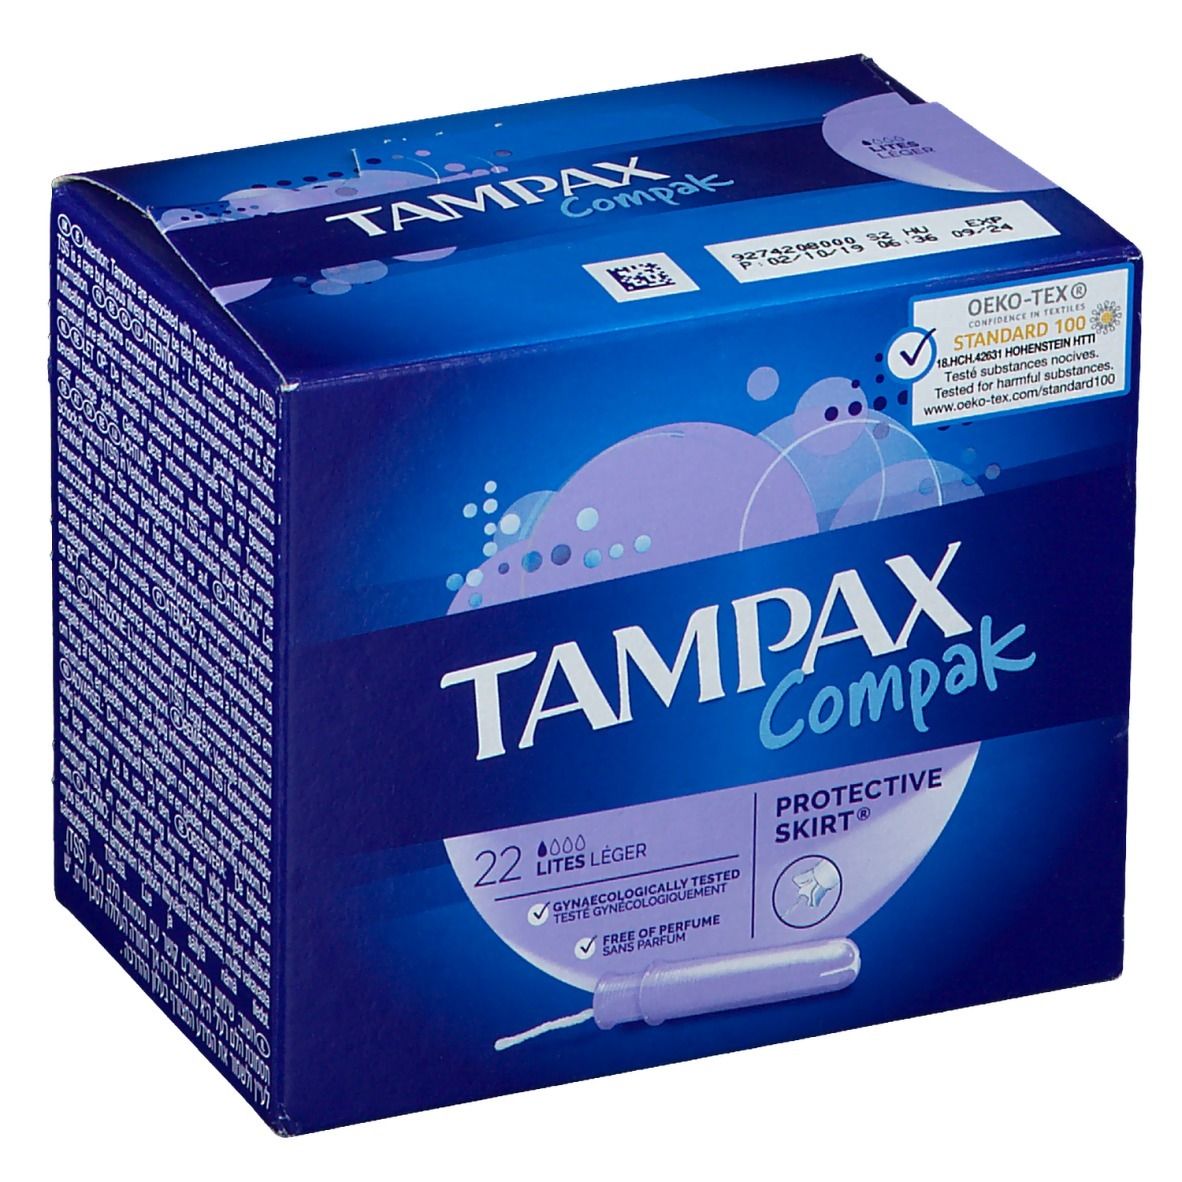 Image of TAMPAX Compak leicht